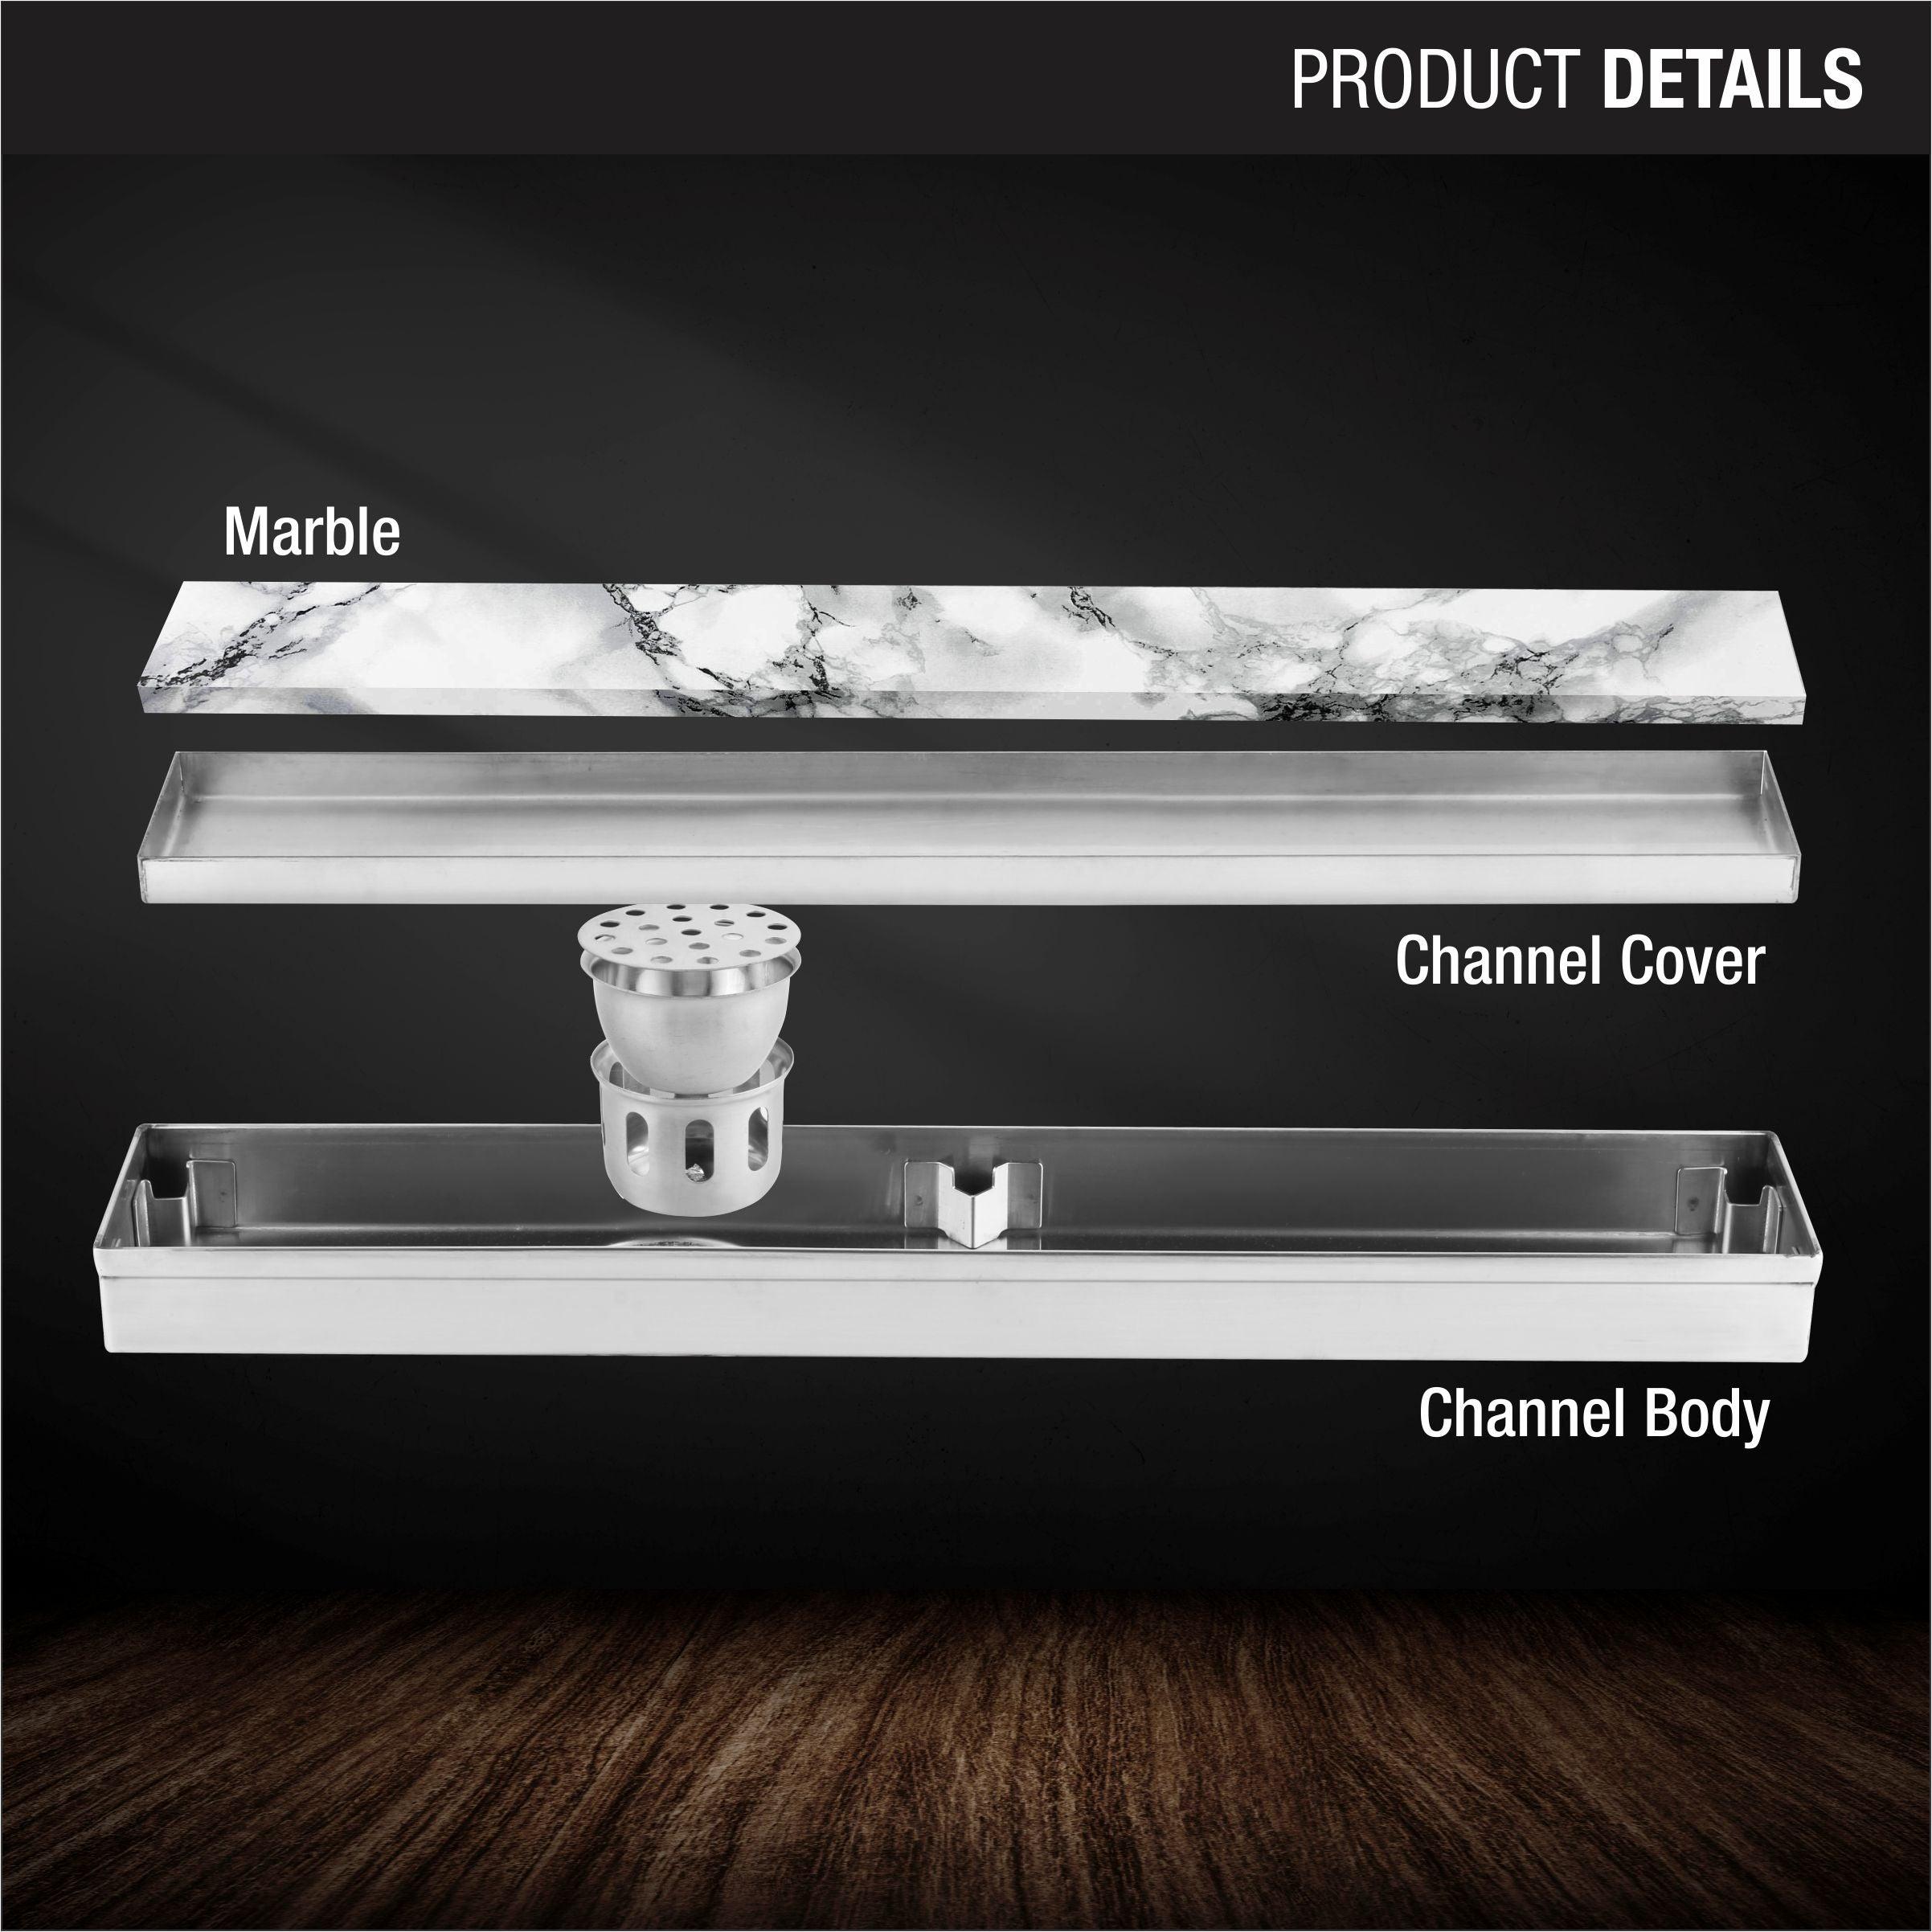 Marble Insert Shower Drain Channel (36 x 3 Inches) product details